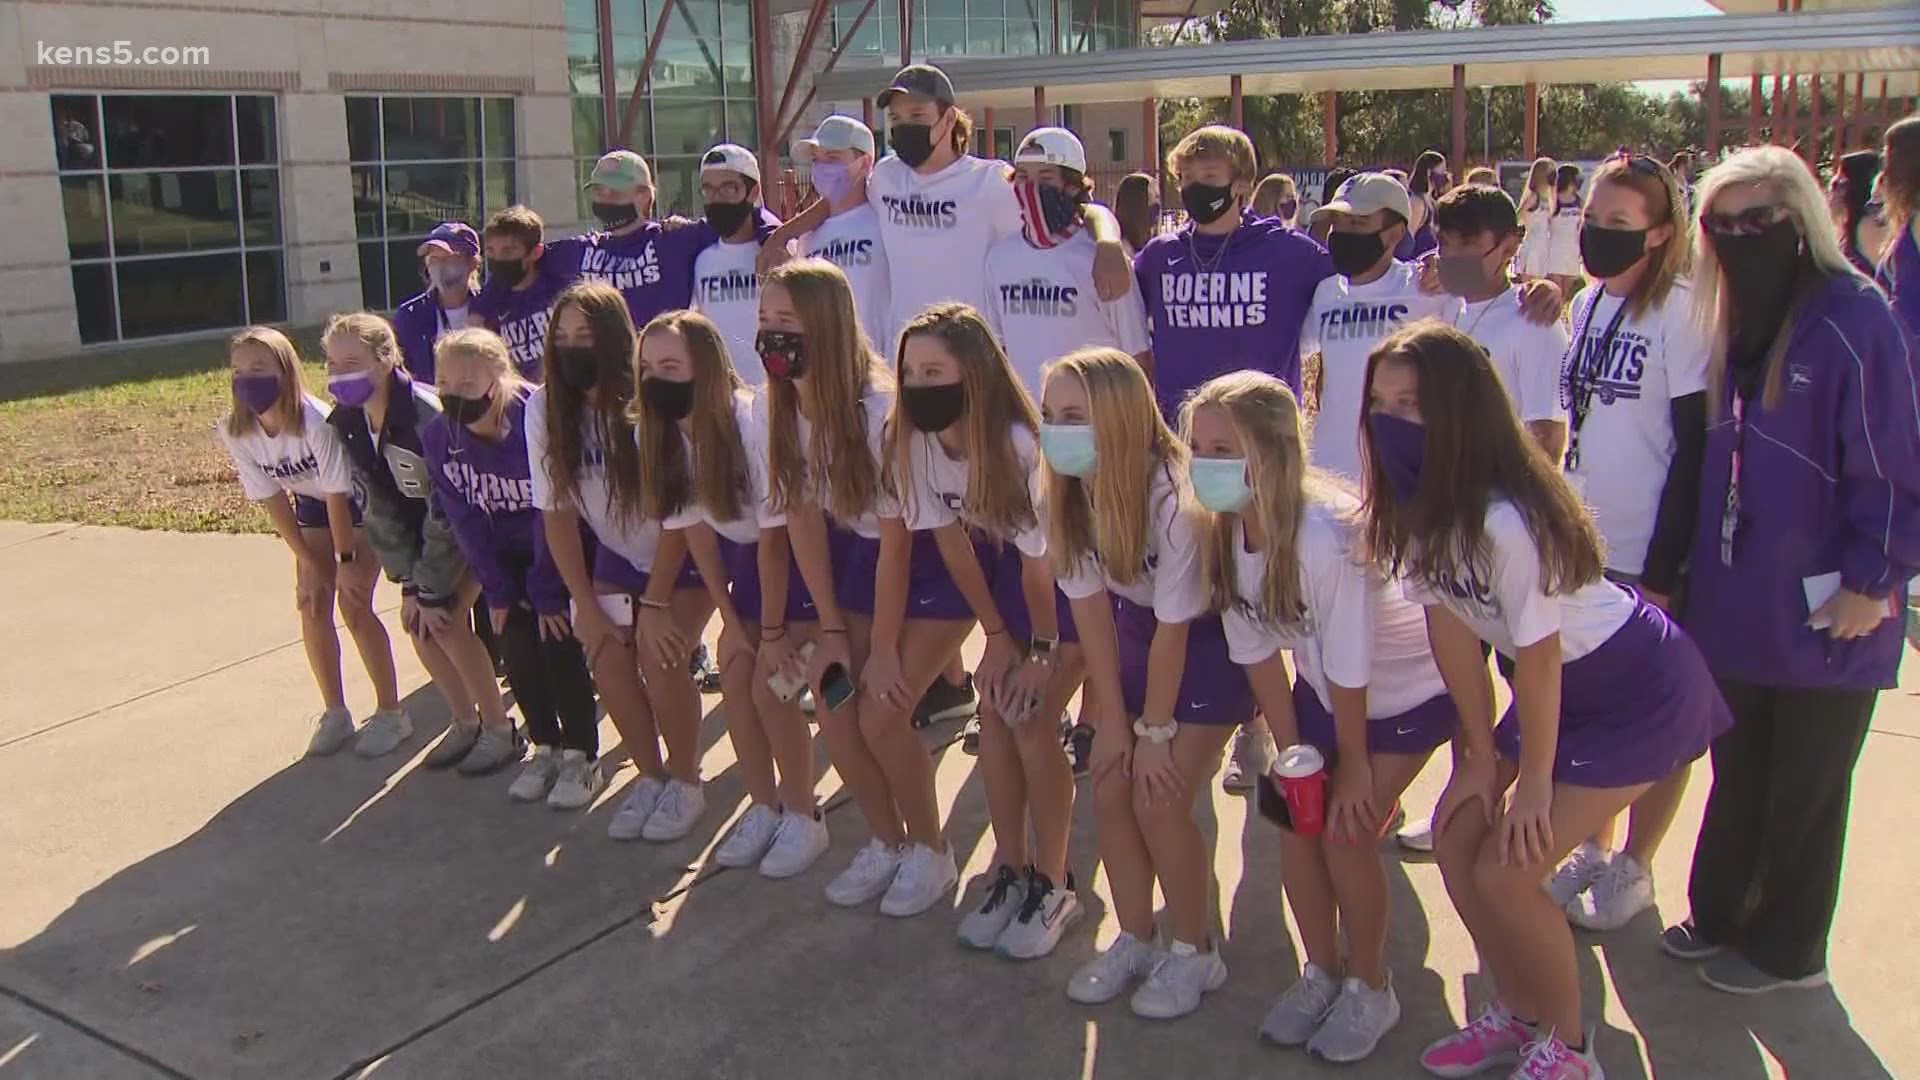 The Boerne High School tennis team left for College Station Monday to compete for a state championship.